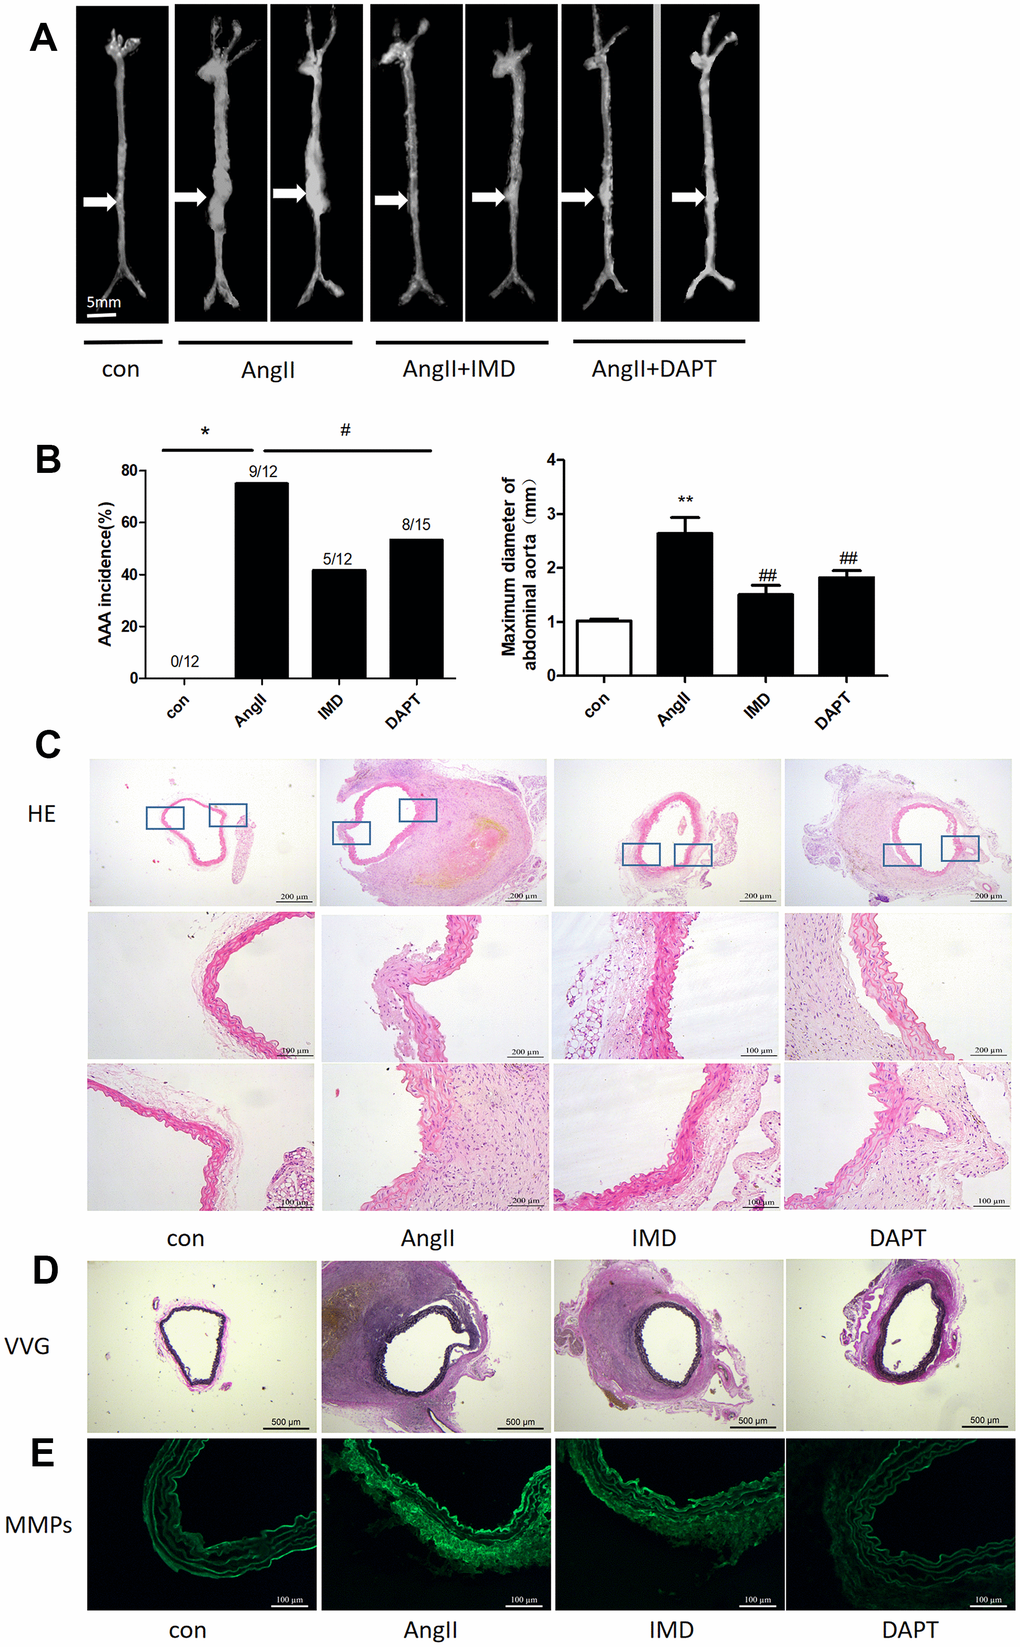 IMD alleviated AngII-induced AAA in mice by blocking Notch1 signaling. (A) Representative photographs of macroscopic features of AAA in male ApoE-/- mice. Control, saline infusion; AngII, AngII (1000 ng/kg/min) infusion; AngII+IMD (300 ng/kg/min) infusion; AngII+DAPT (10 mg/kg) gavage for 4 weeks. The arrows indicate typical AAA in ApoE-/- mice. Scale bars, 5 mm. (B) Incidence of AngII-induced AAA in animals and maximal abdominal aortic diameter of survivor mice at the end of 28 days. (C) Representative HE staining of aortas. Scale bar, 200 μm, 100 μm. (D) Representative VVG staining. Scale bar, 500 μm. (E) Representative in situ zymography of MMP activity in suprarenal aortas from ApoE-/- mice. Scale bar, 100 μm. Data are mean ± SD. *PP